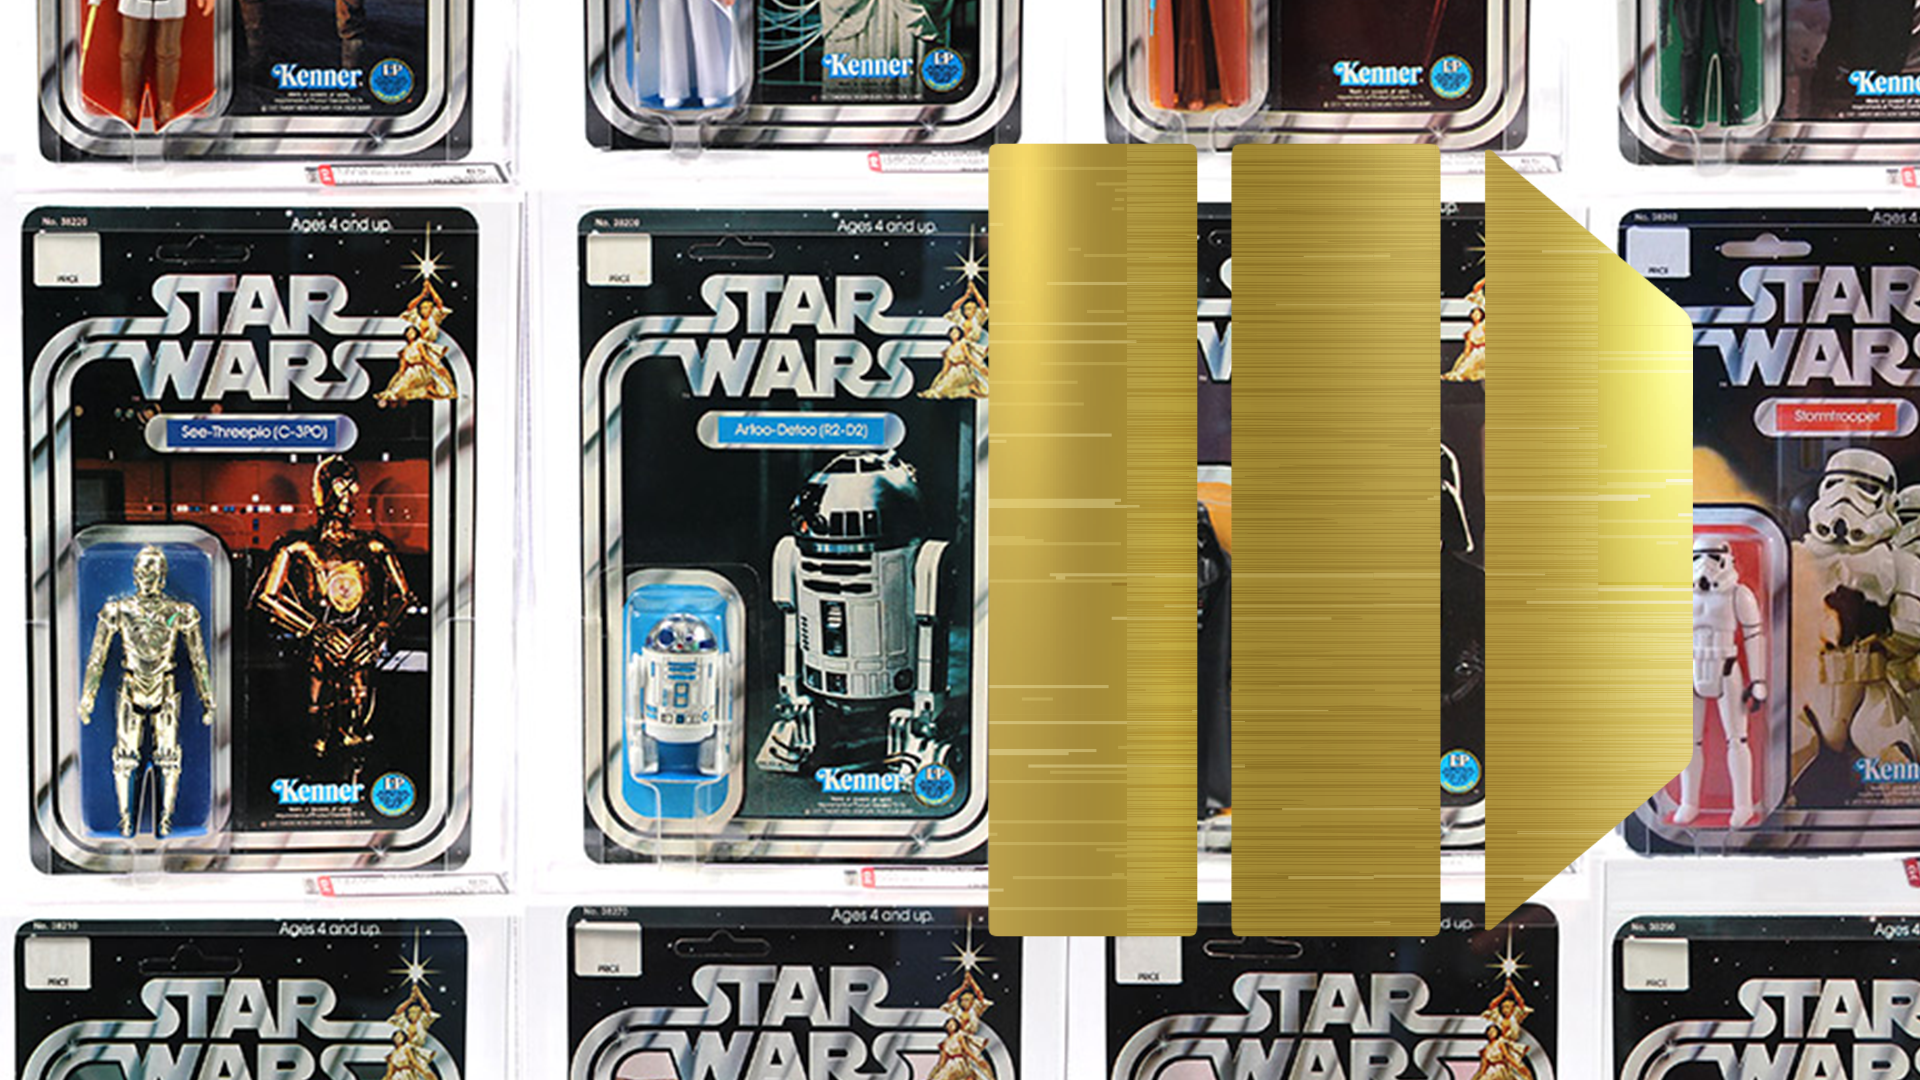 Do You Nerd Out On Star Wars Toy Packaging? Well, There’s A Book For That!